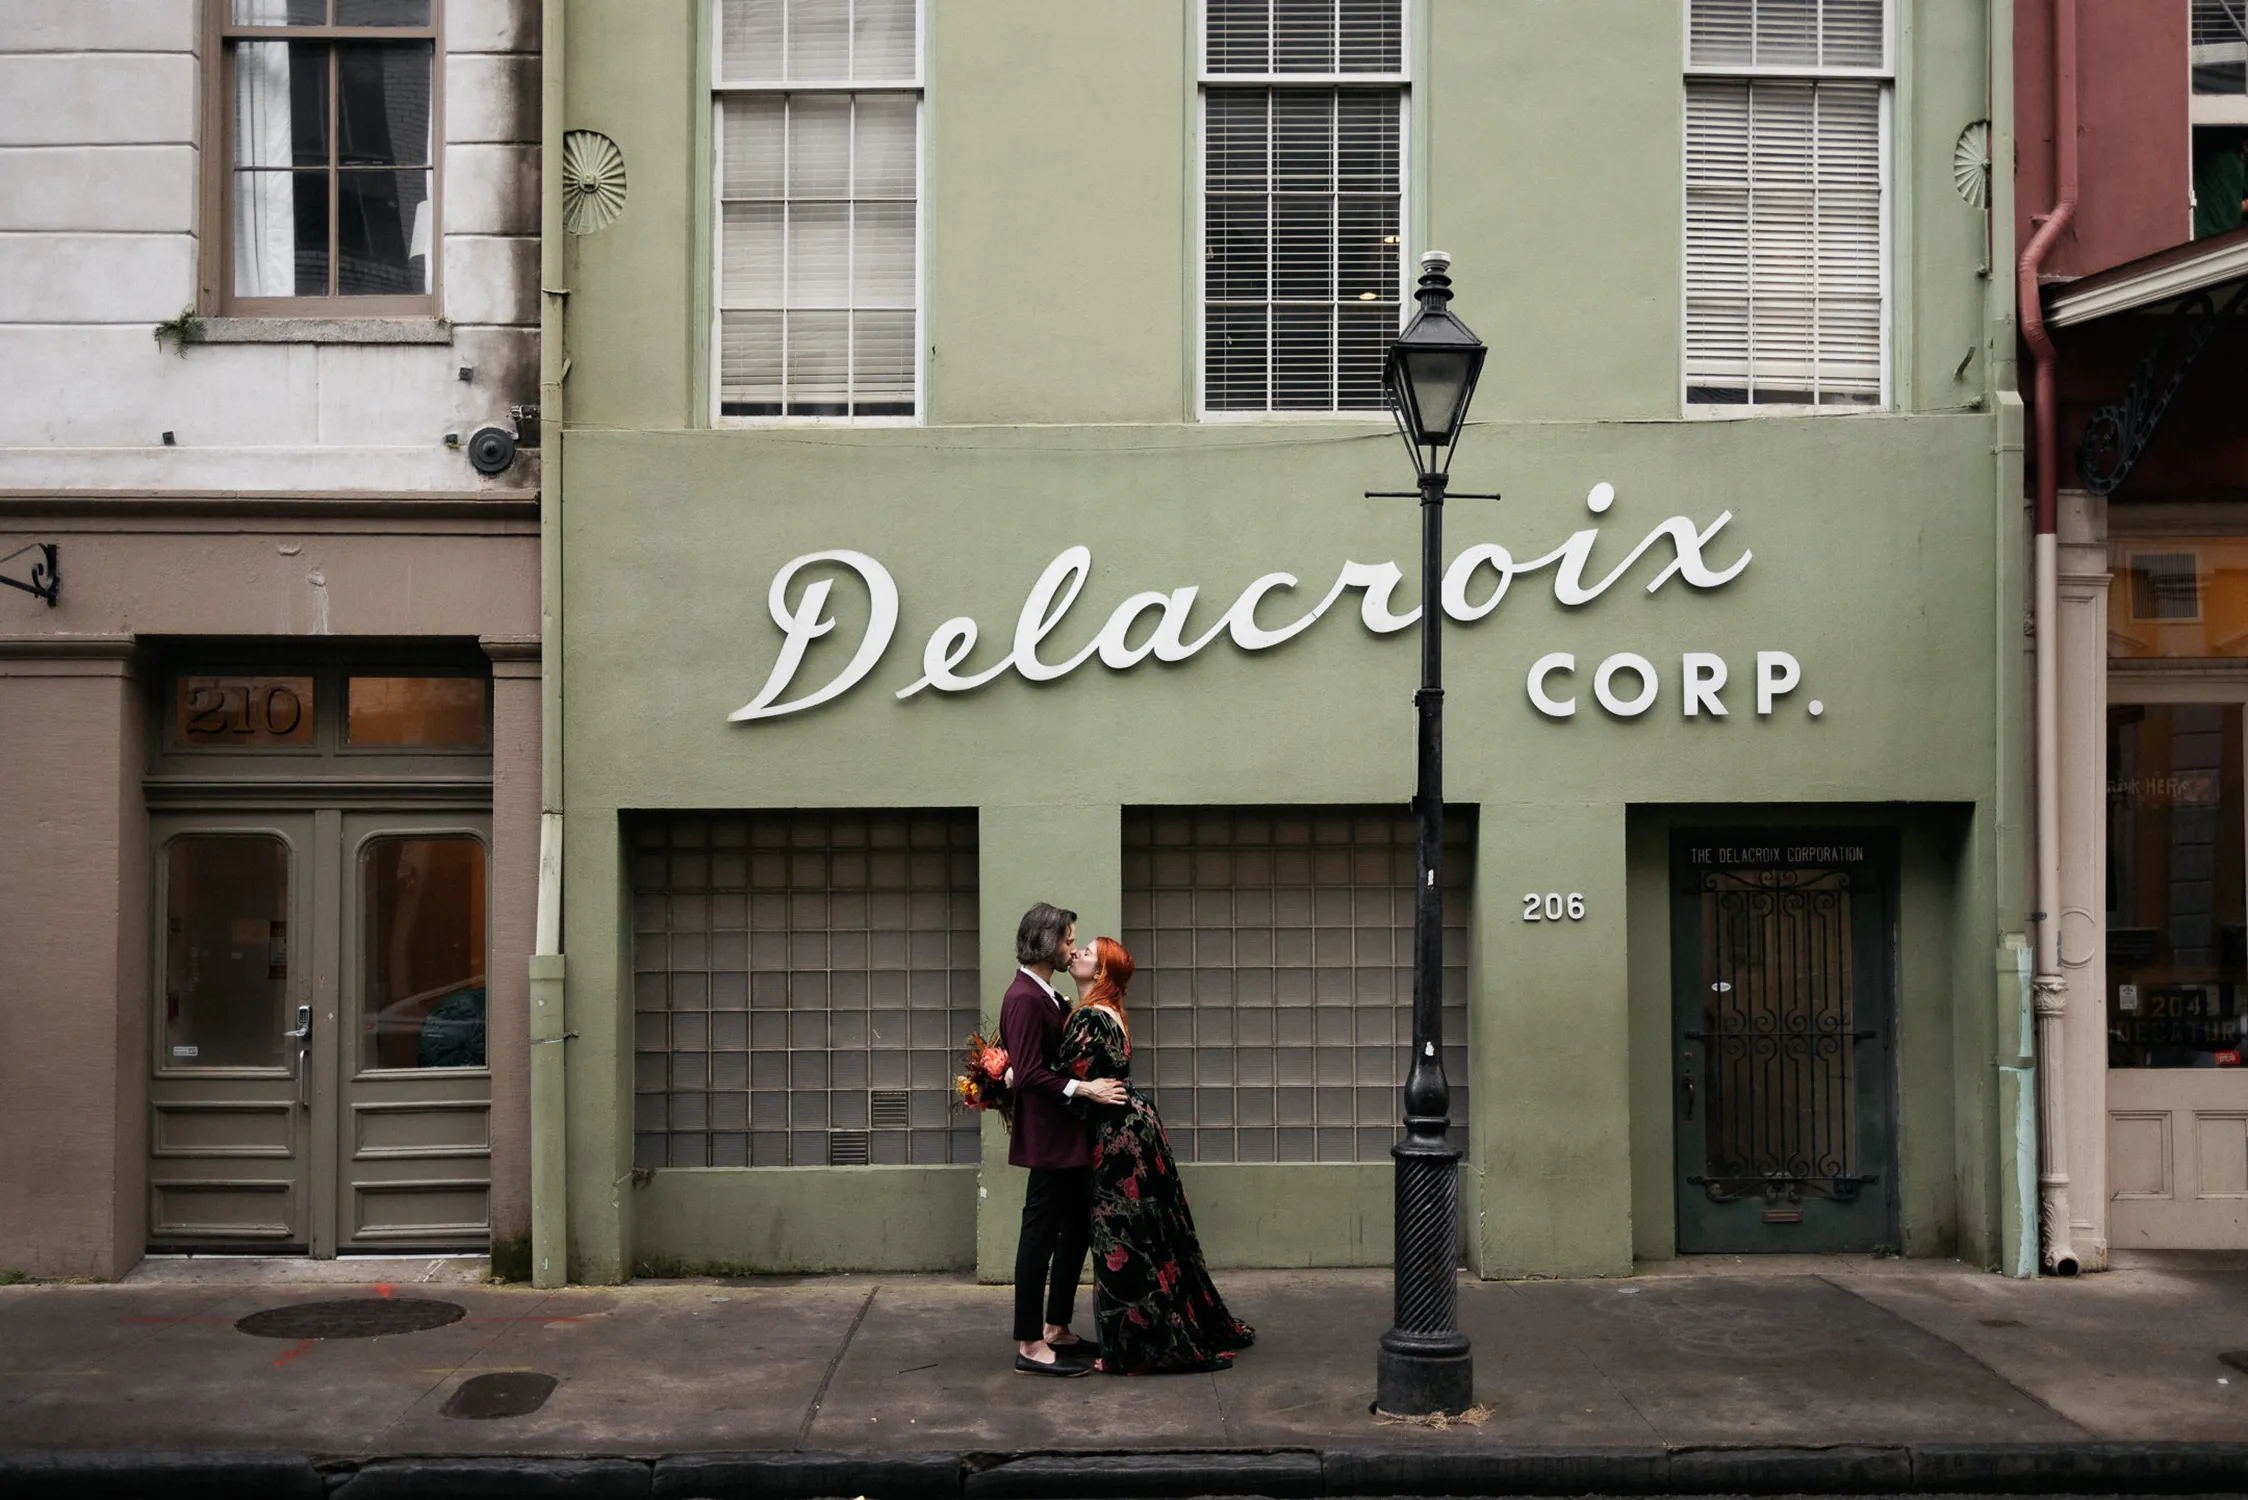 In an evocative city scene by Jean Laurent Gaudy, acclaimed in the Top Wedding Photographers of 2024, a couple shares a romantic embrace in front of the vintage Delacroix Corp. building, a moment of love captured amidst the urban charm of New Orleans.